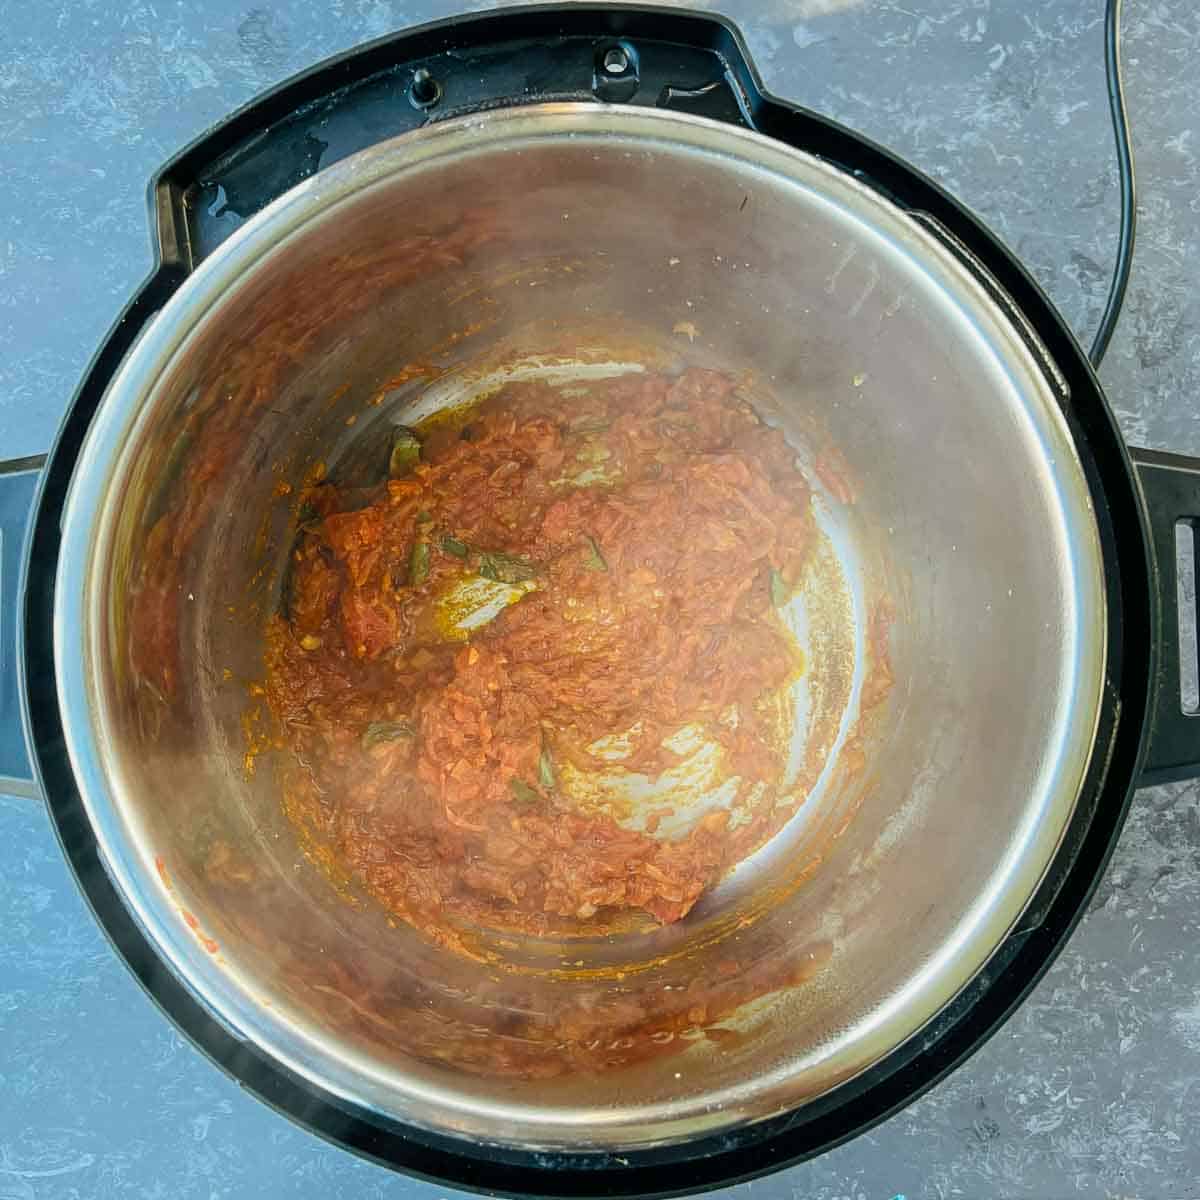 Cooked tomatoes and spices in the Instant Pot.